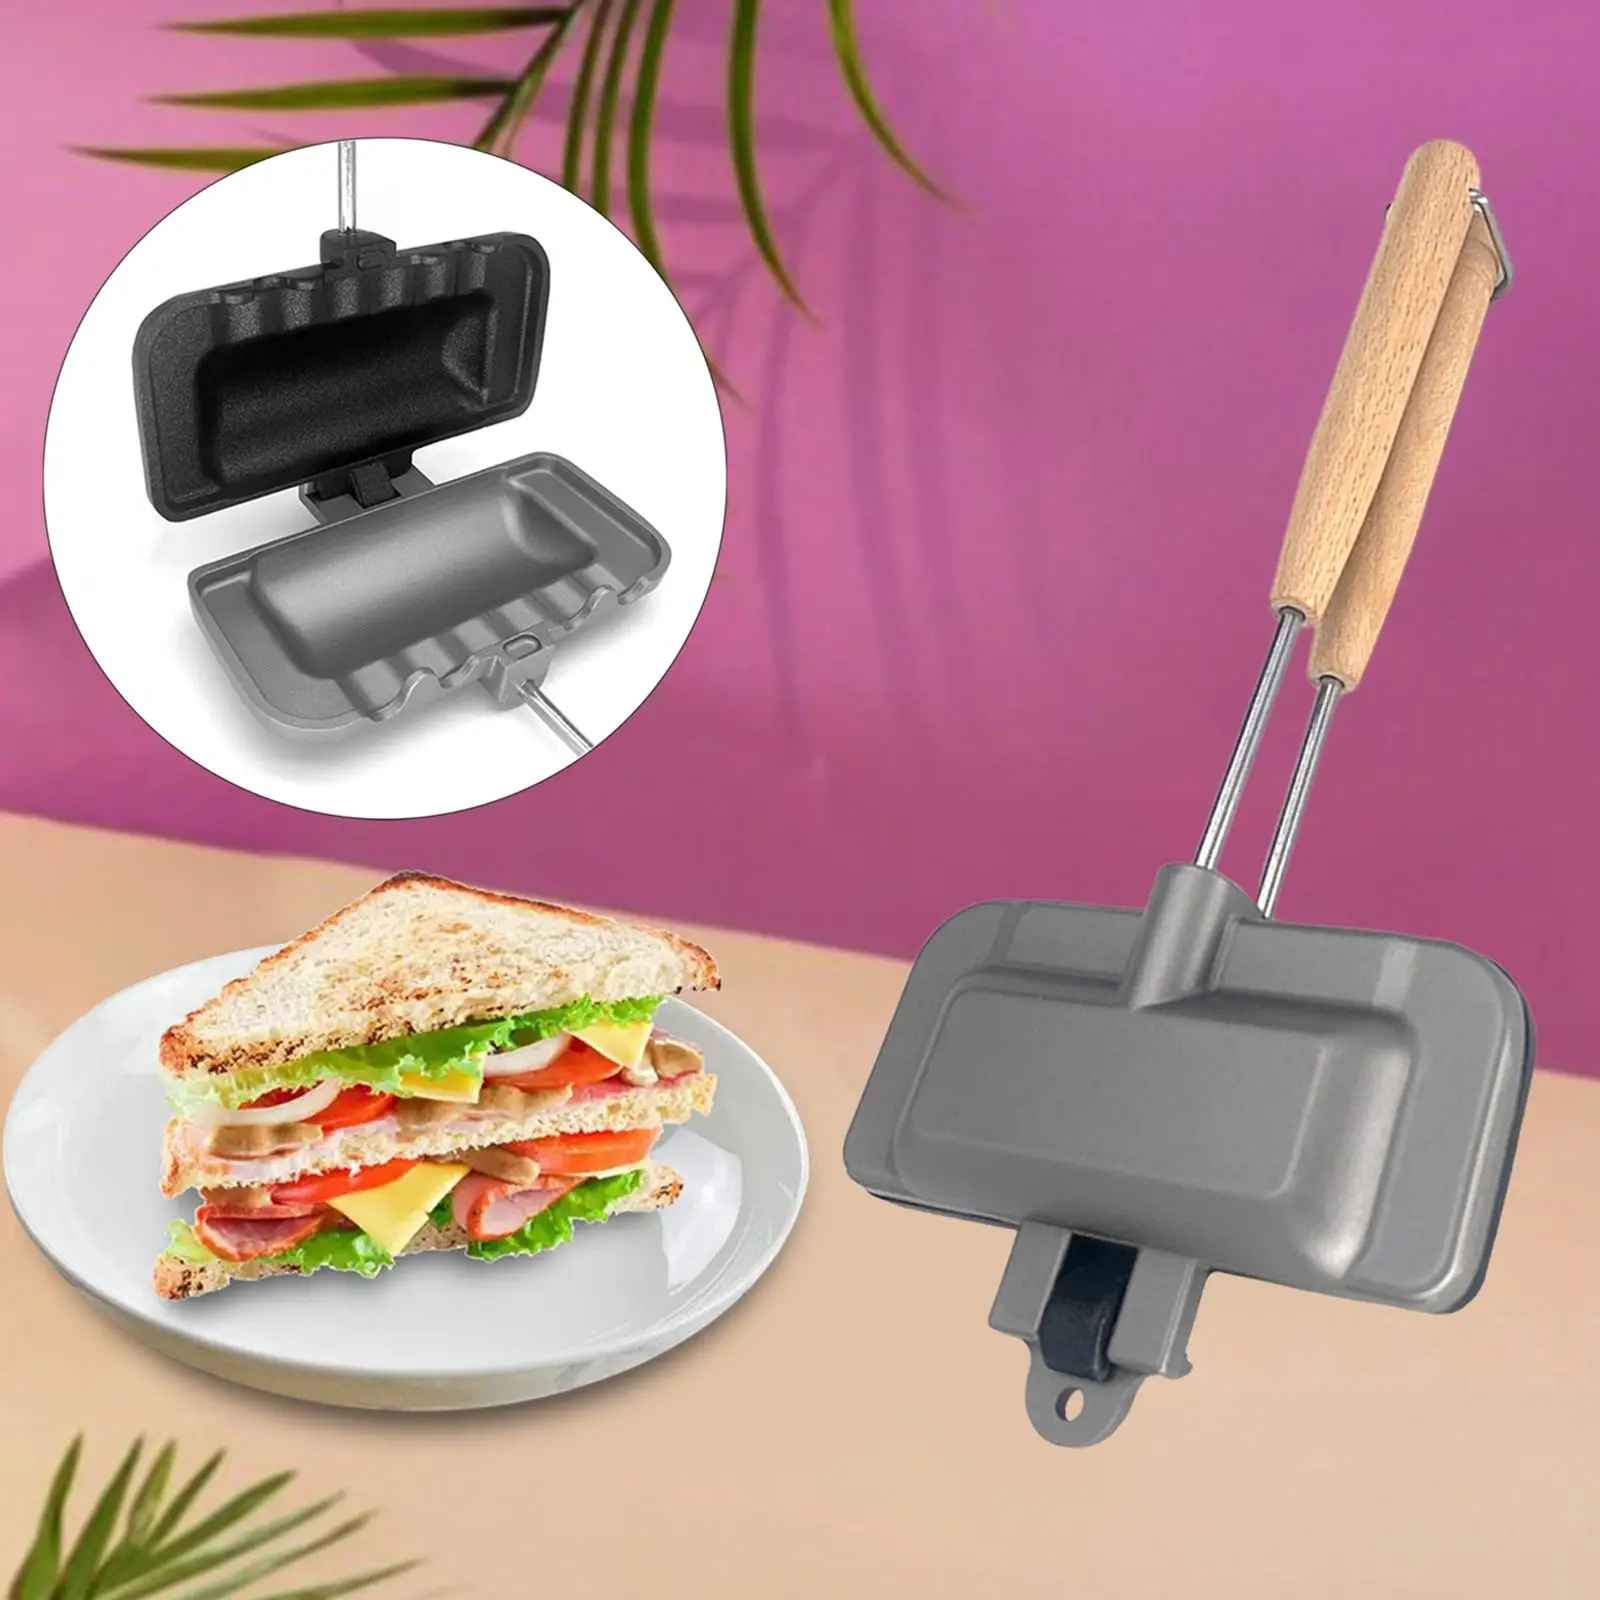 Nonstick Sandwich Pan, Aluminum Frying Pan for Cafe Home Restaurant Dining Room Kitchen